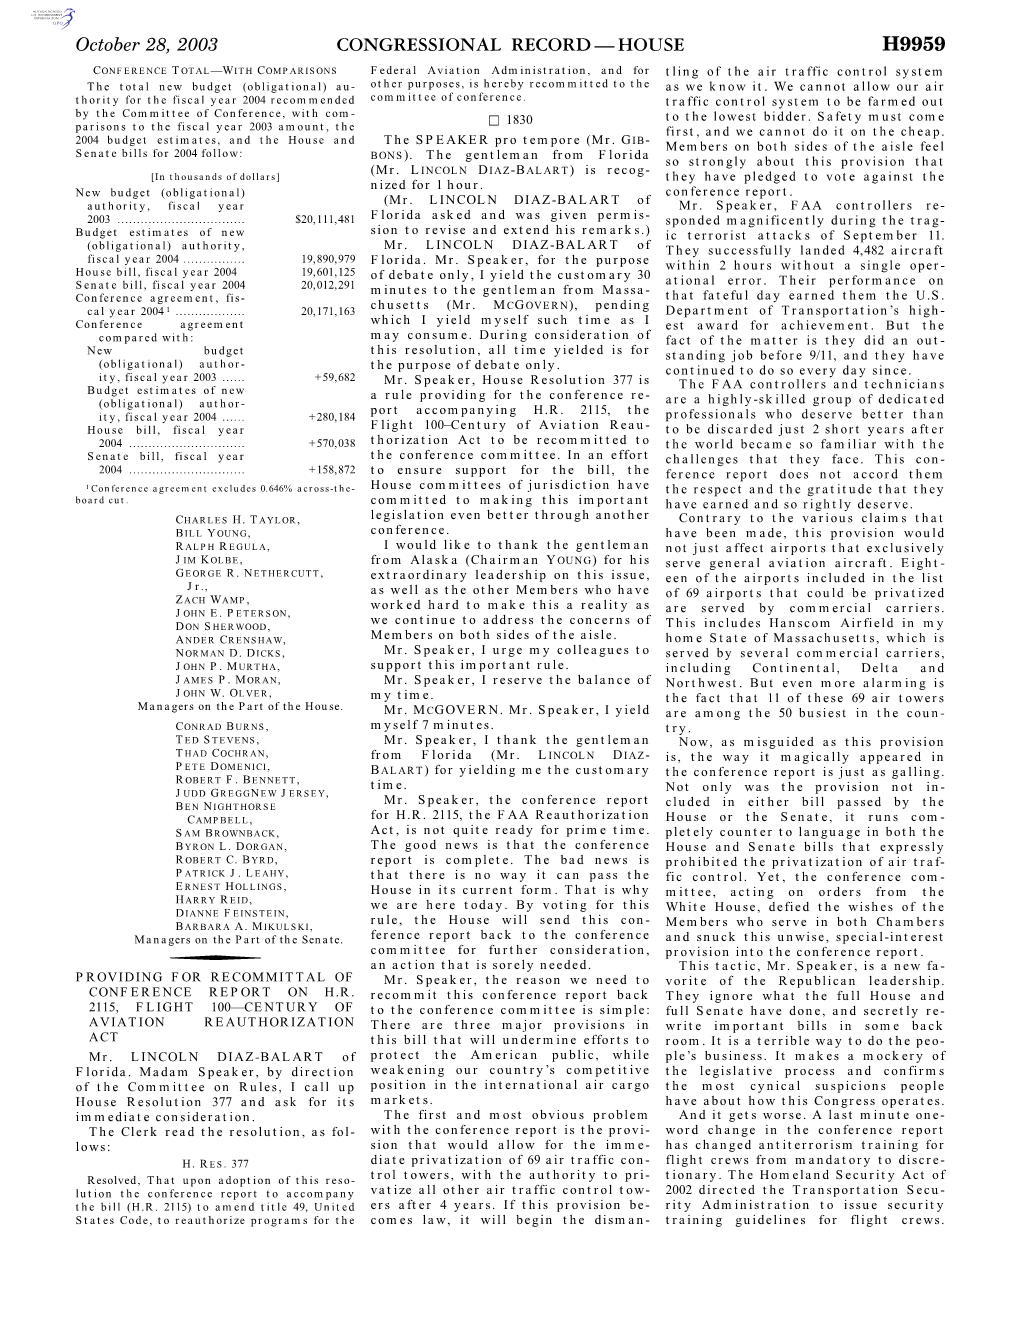 Congressional Record—House H9959